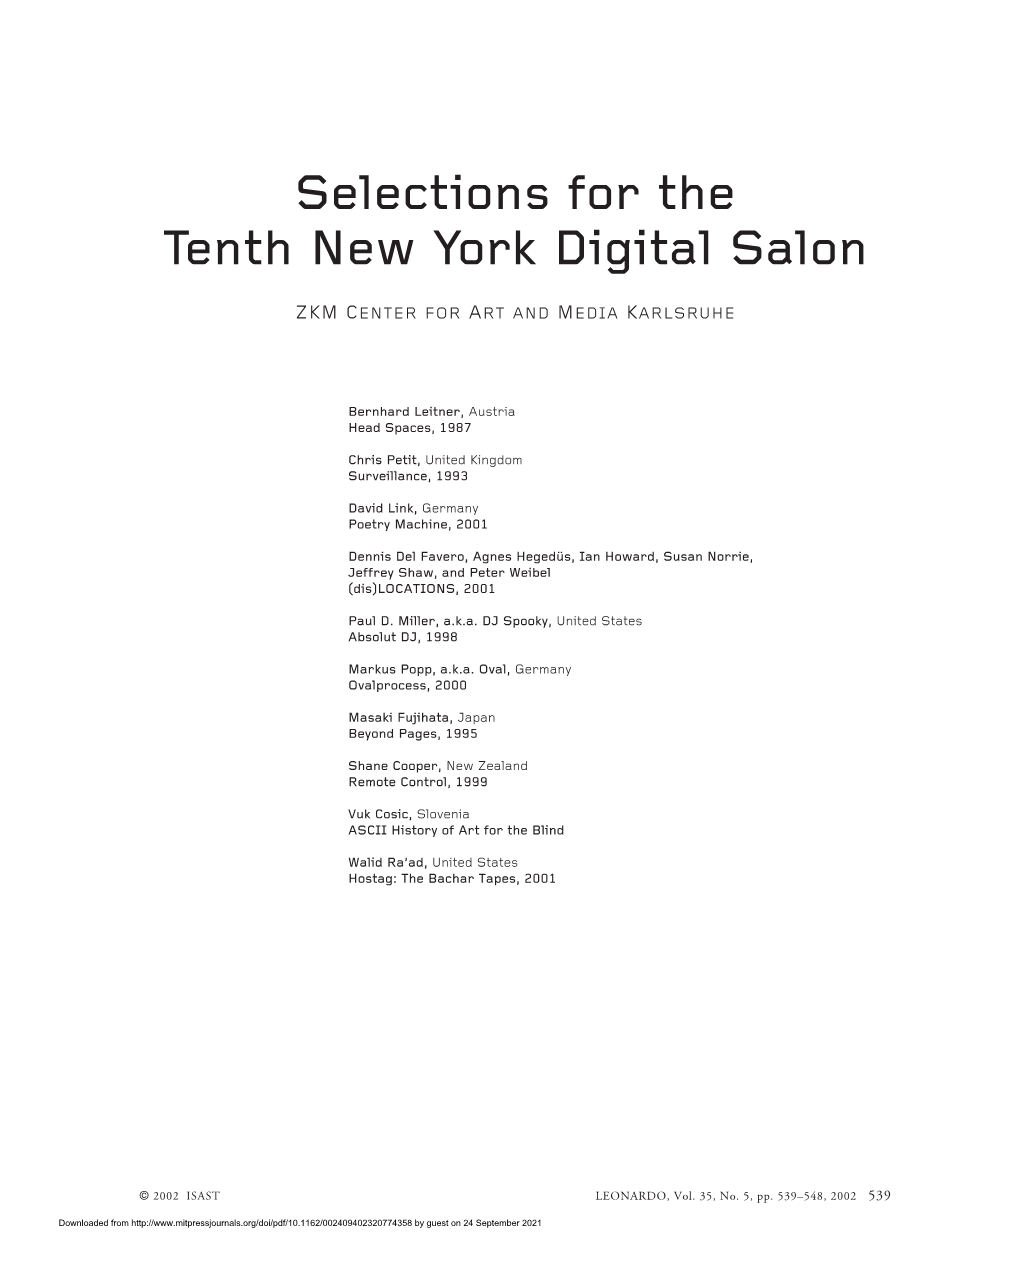 Selections for the Tenth New York Digital Salon